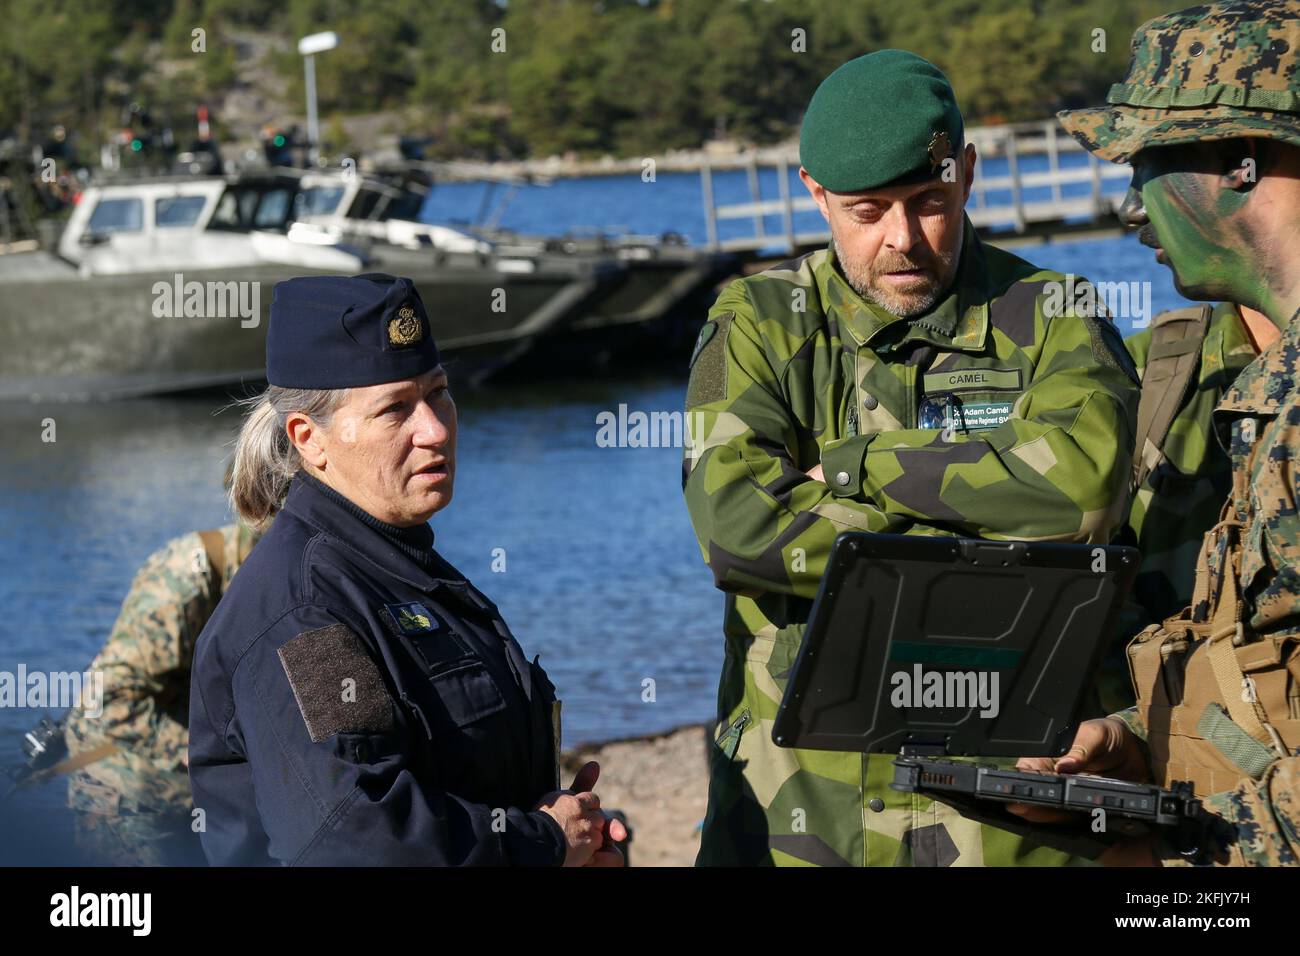 Swedish Navy Rear Admiral Ewa Skoog Haslum (left), Chief of Swedish Navy, and Col. Adam Camél (right), commanding officer, Stockholm Marine Regiment, receives a demonstration on expeditionary engineering reconnaissance equipment employment while visiting U.S. and Swedish Marines during exercise Archipelago Endeavor 22 (AE22) on Berga Naval Base, Sweden, Sept. 21, 2022. AE22 is an integrated field training exercise that increases operational capability and enhances strategic cooperation between the U.S. Marines and Swedish forces. Stock Photo